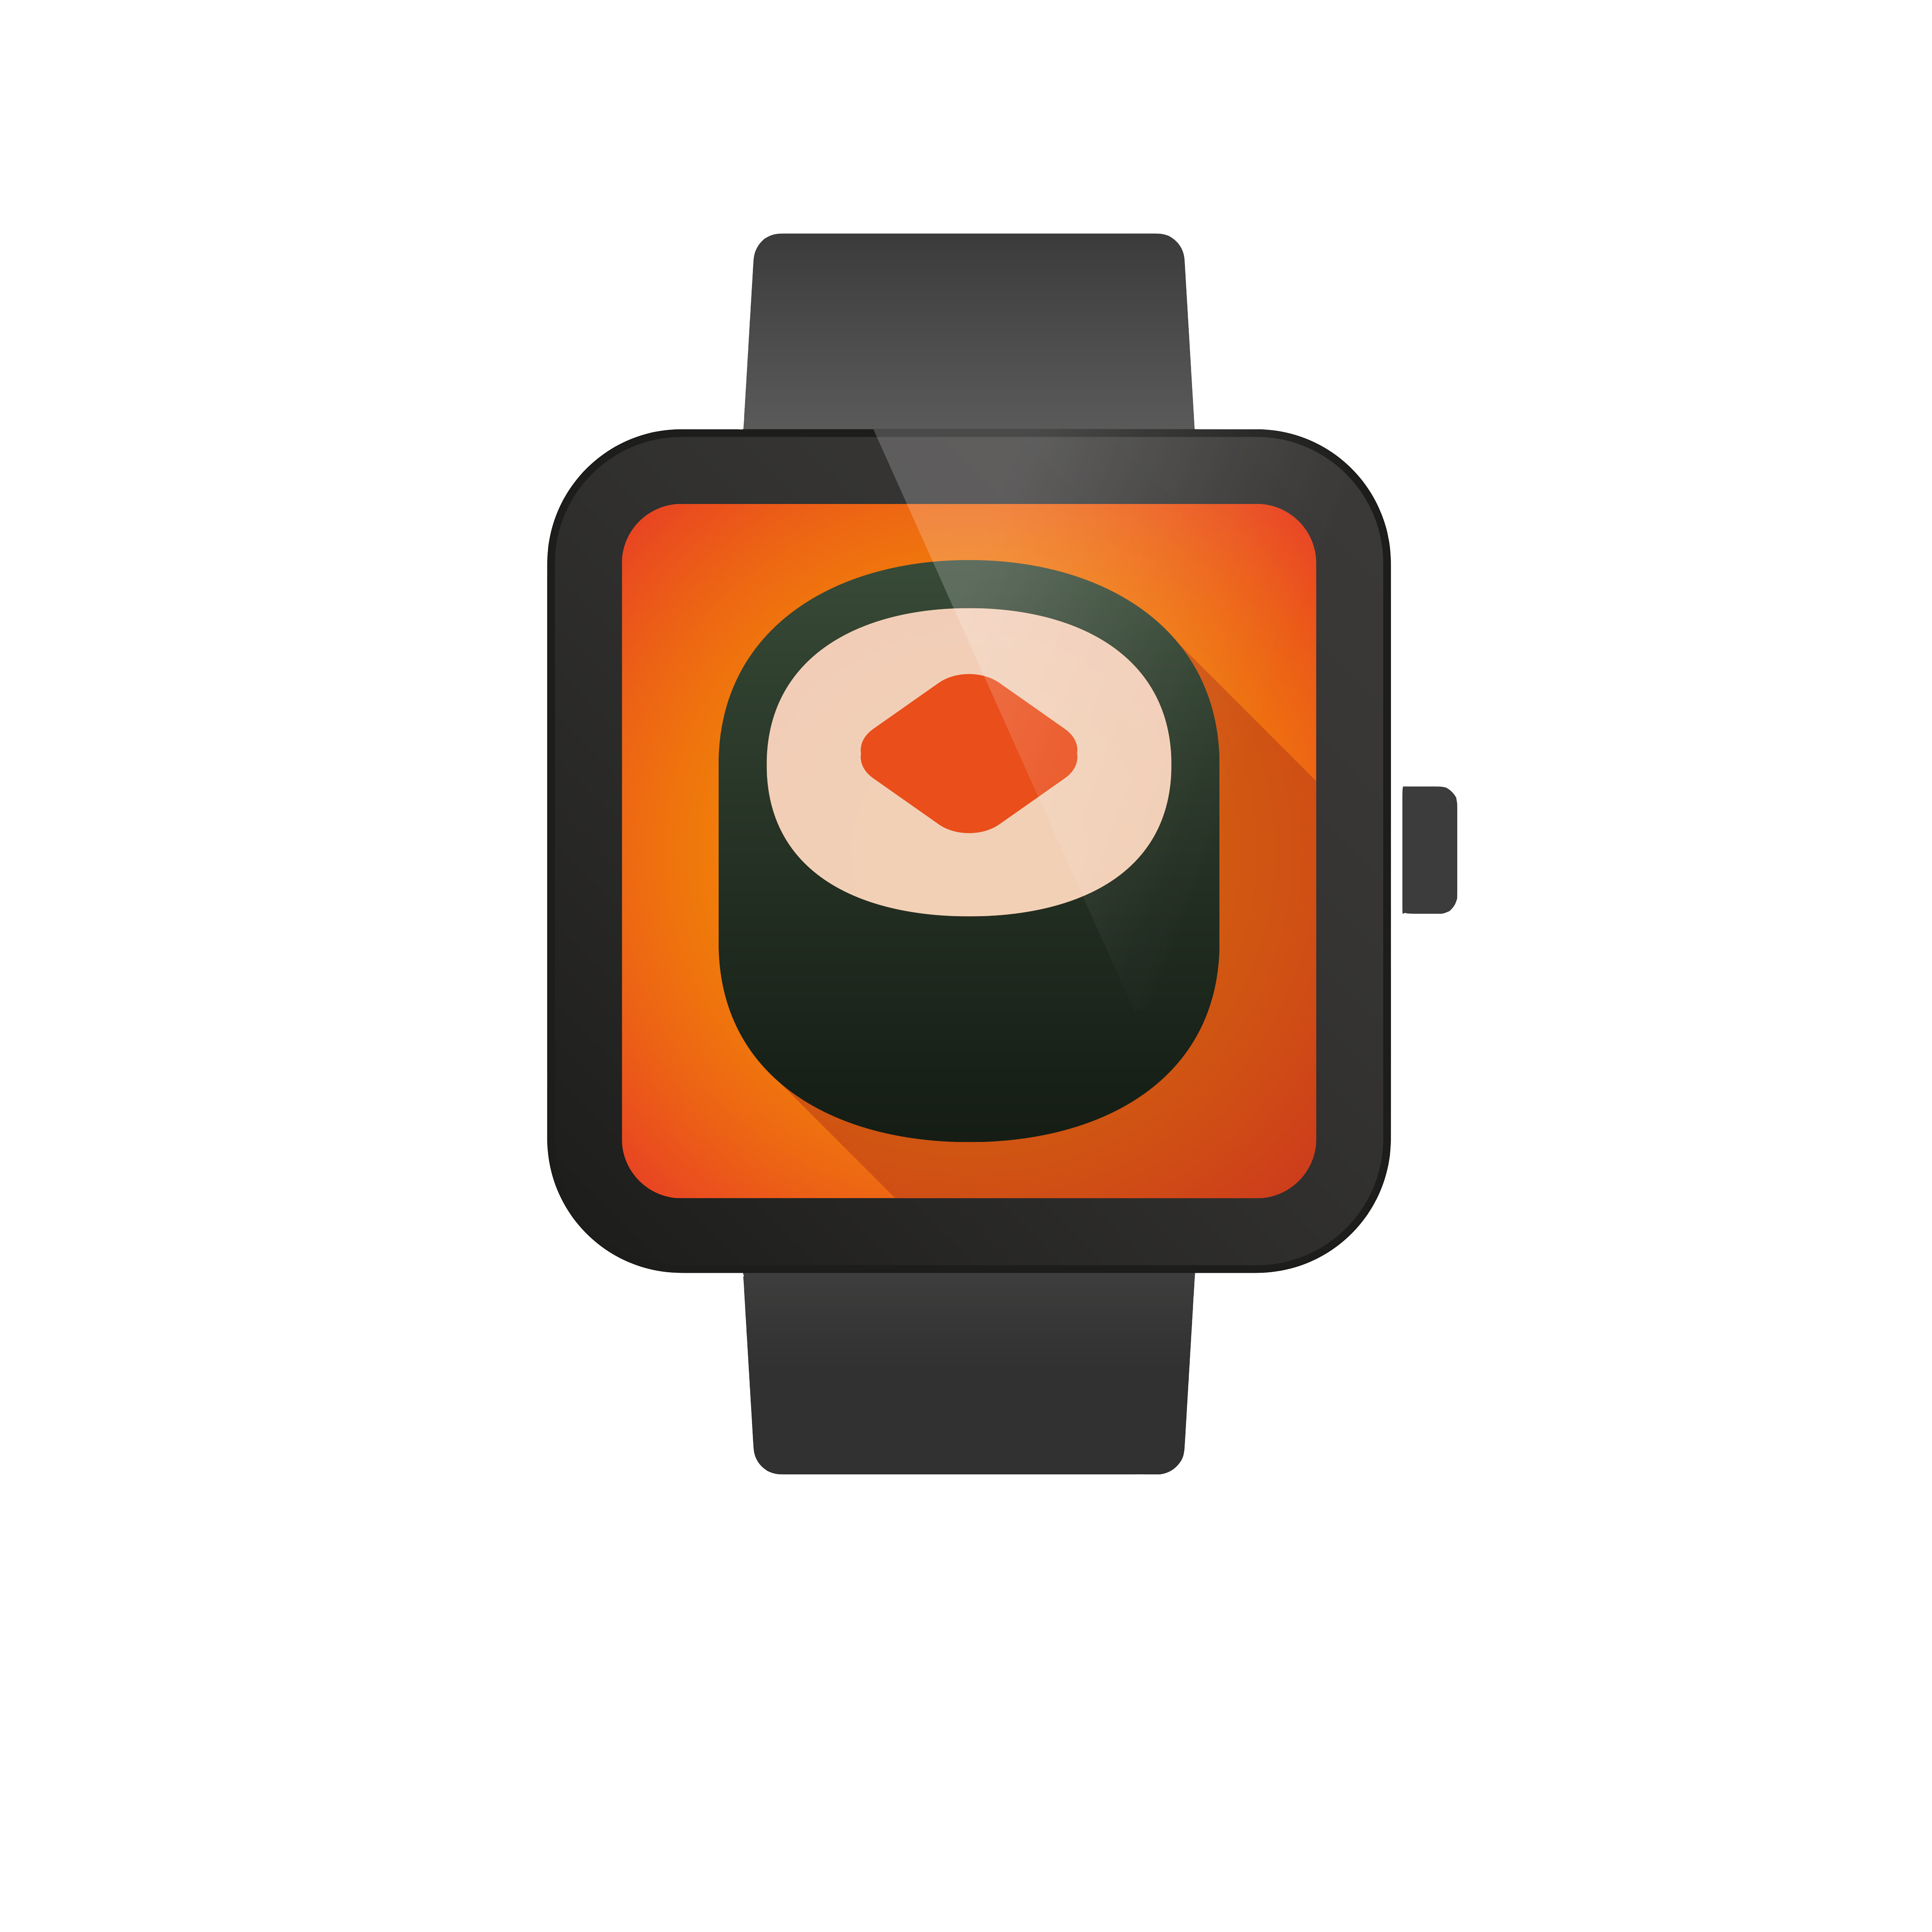 Smart watch icon with a sushi